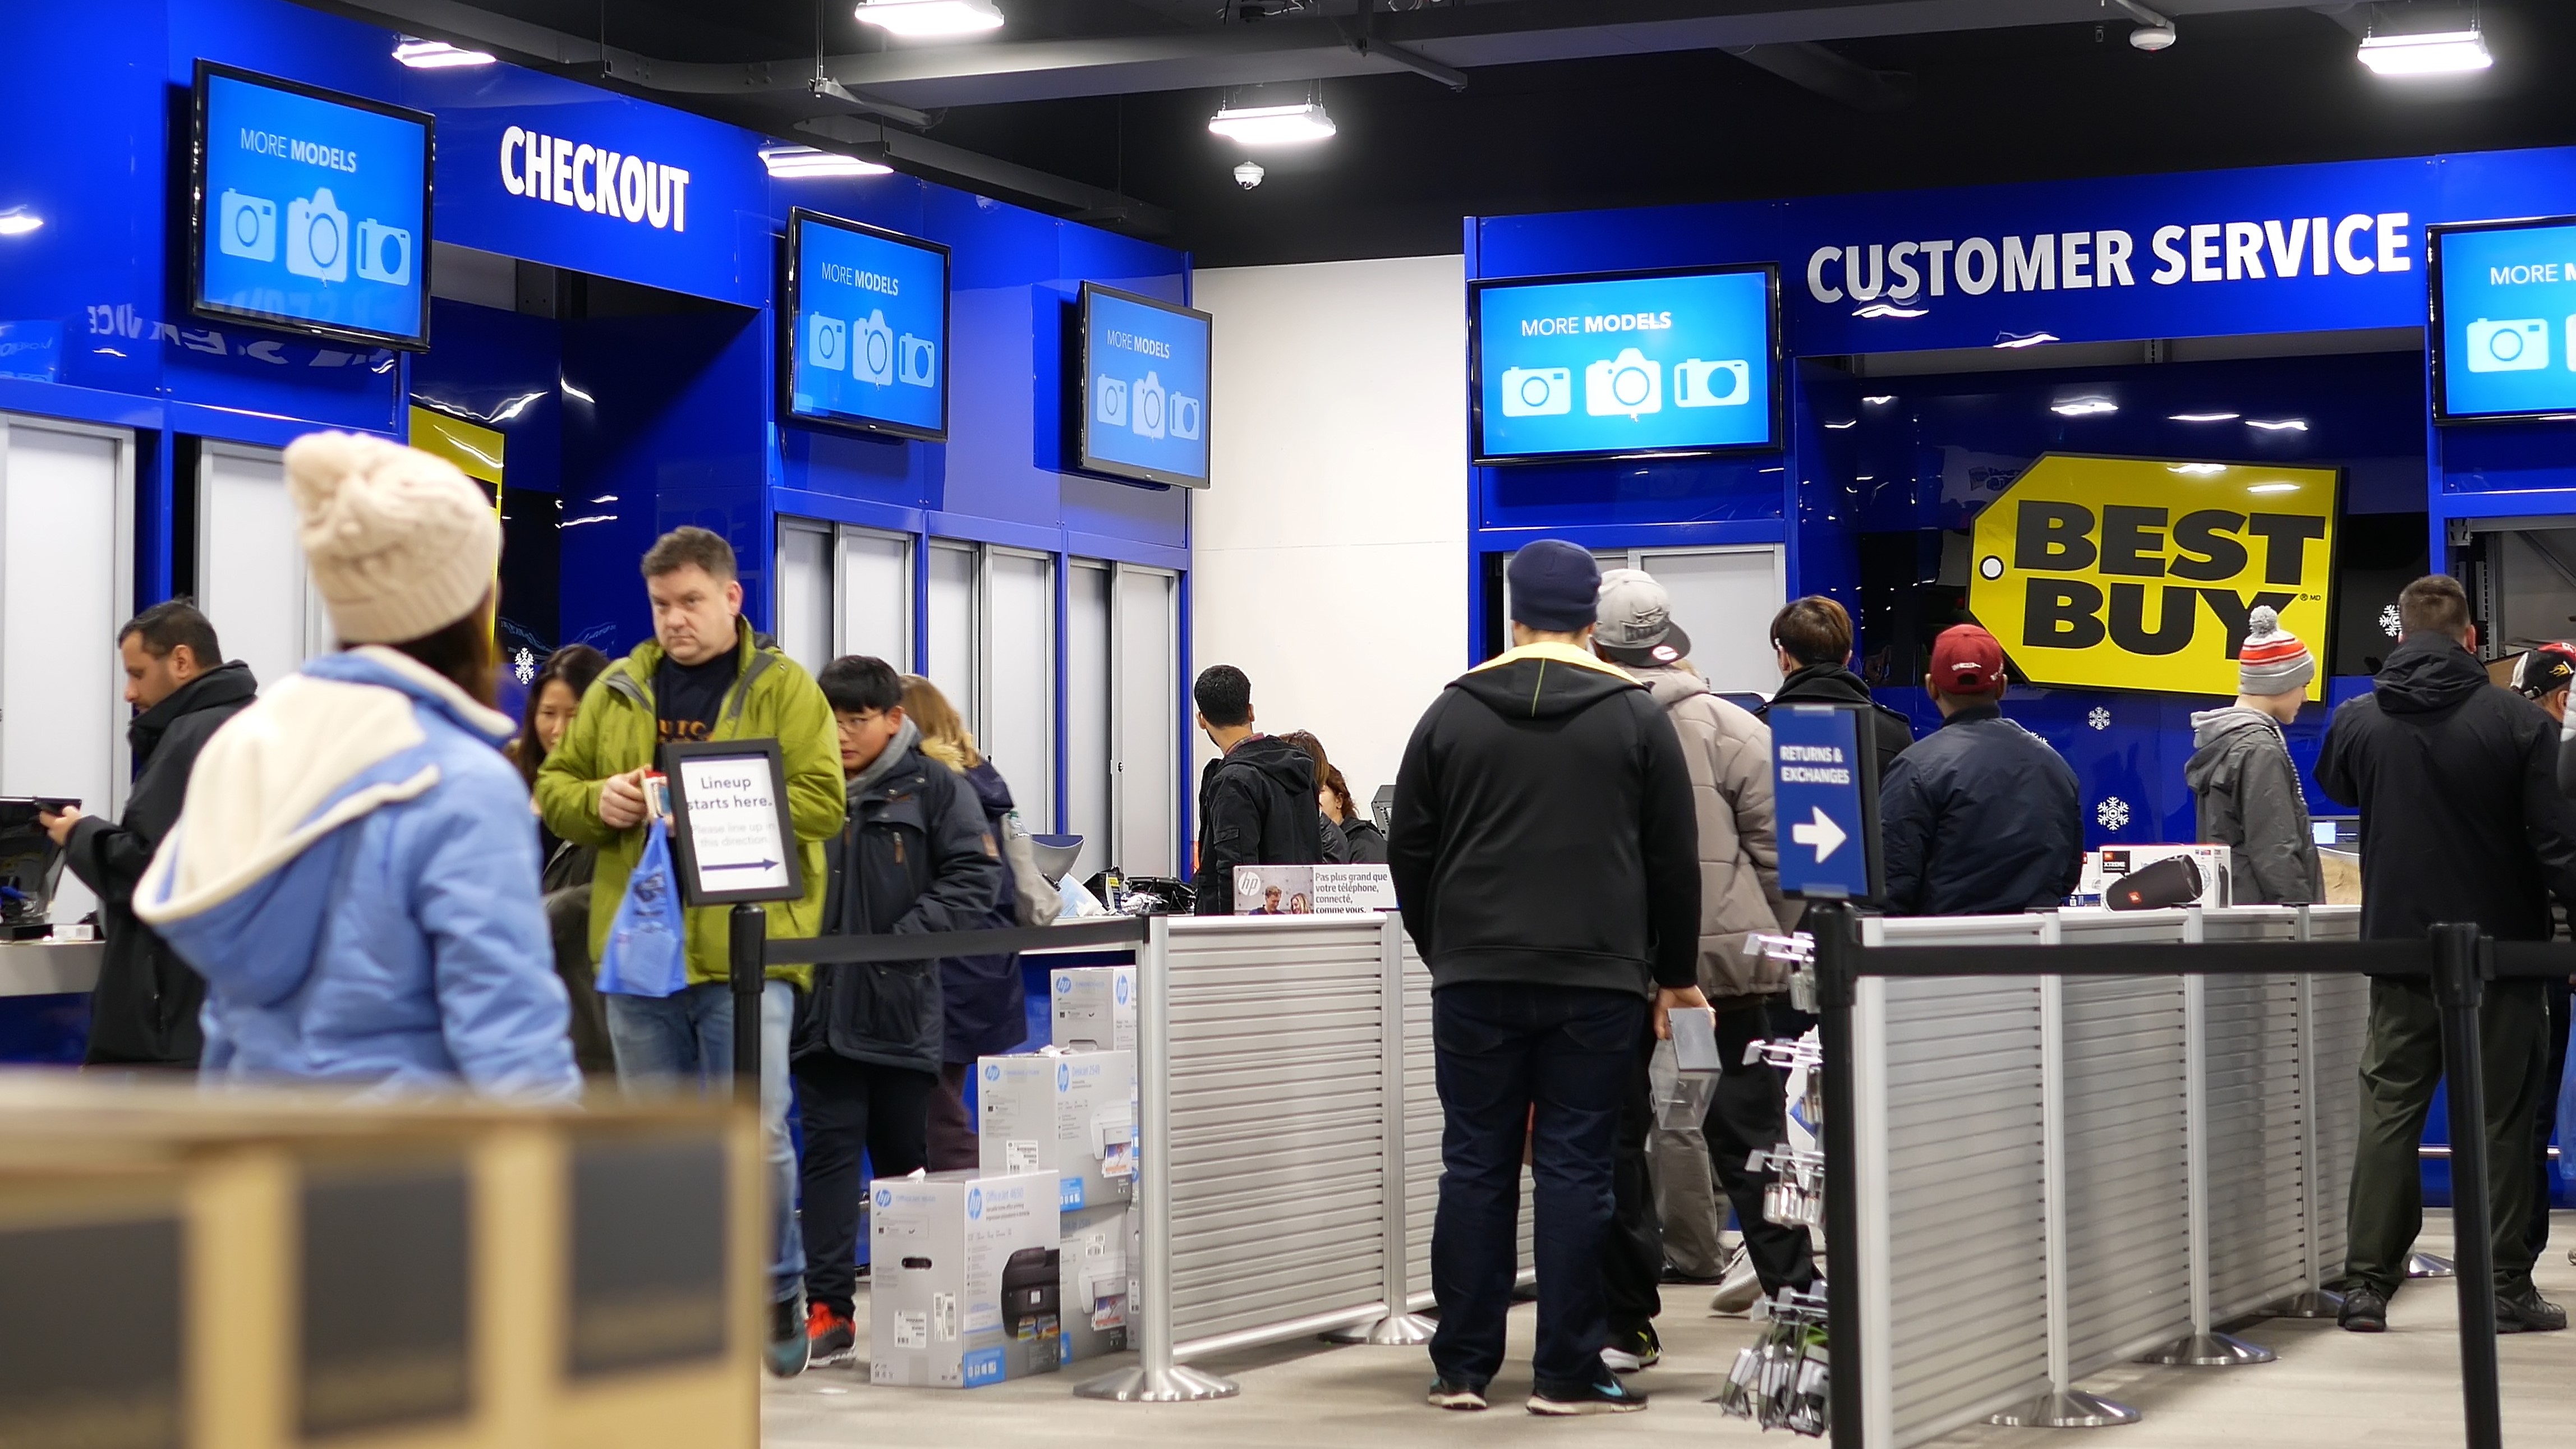 Inside of a Best Buy, an every day scene at the customer service section with people milling around